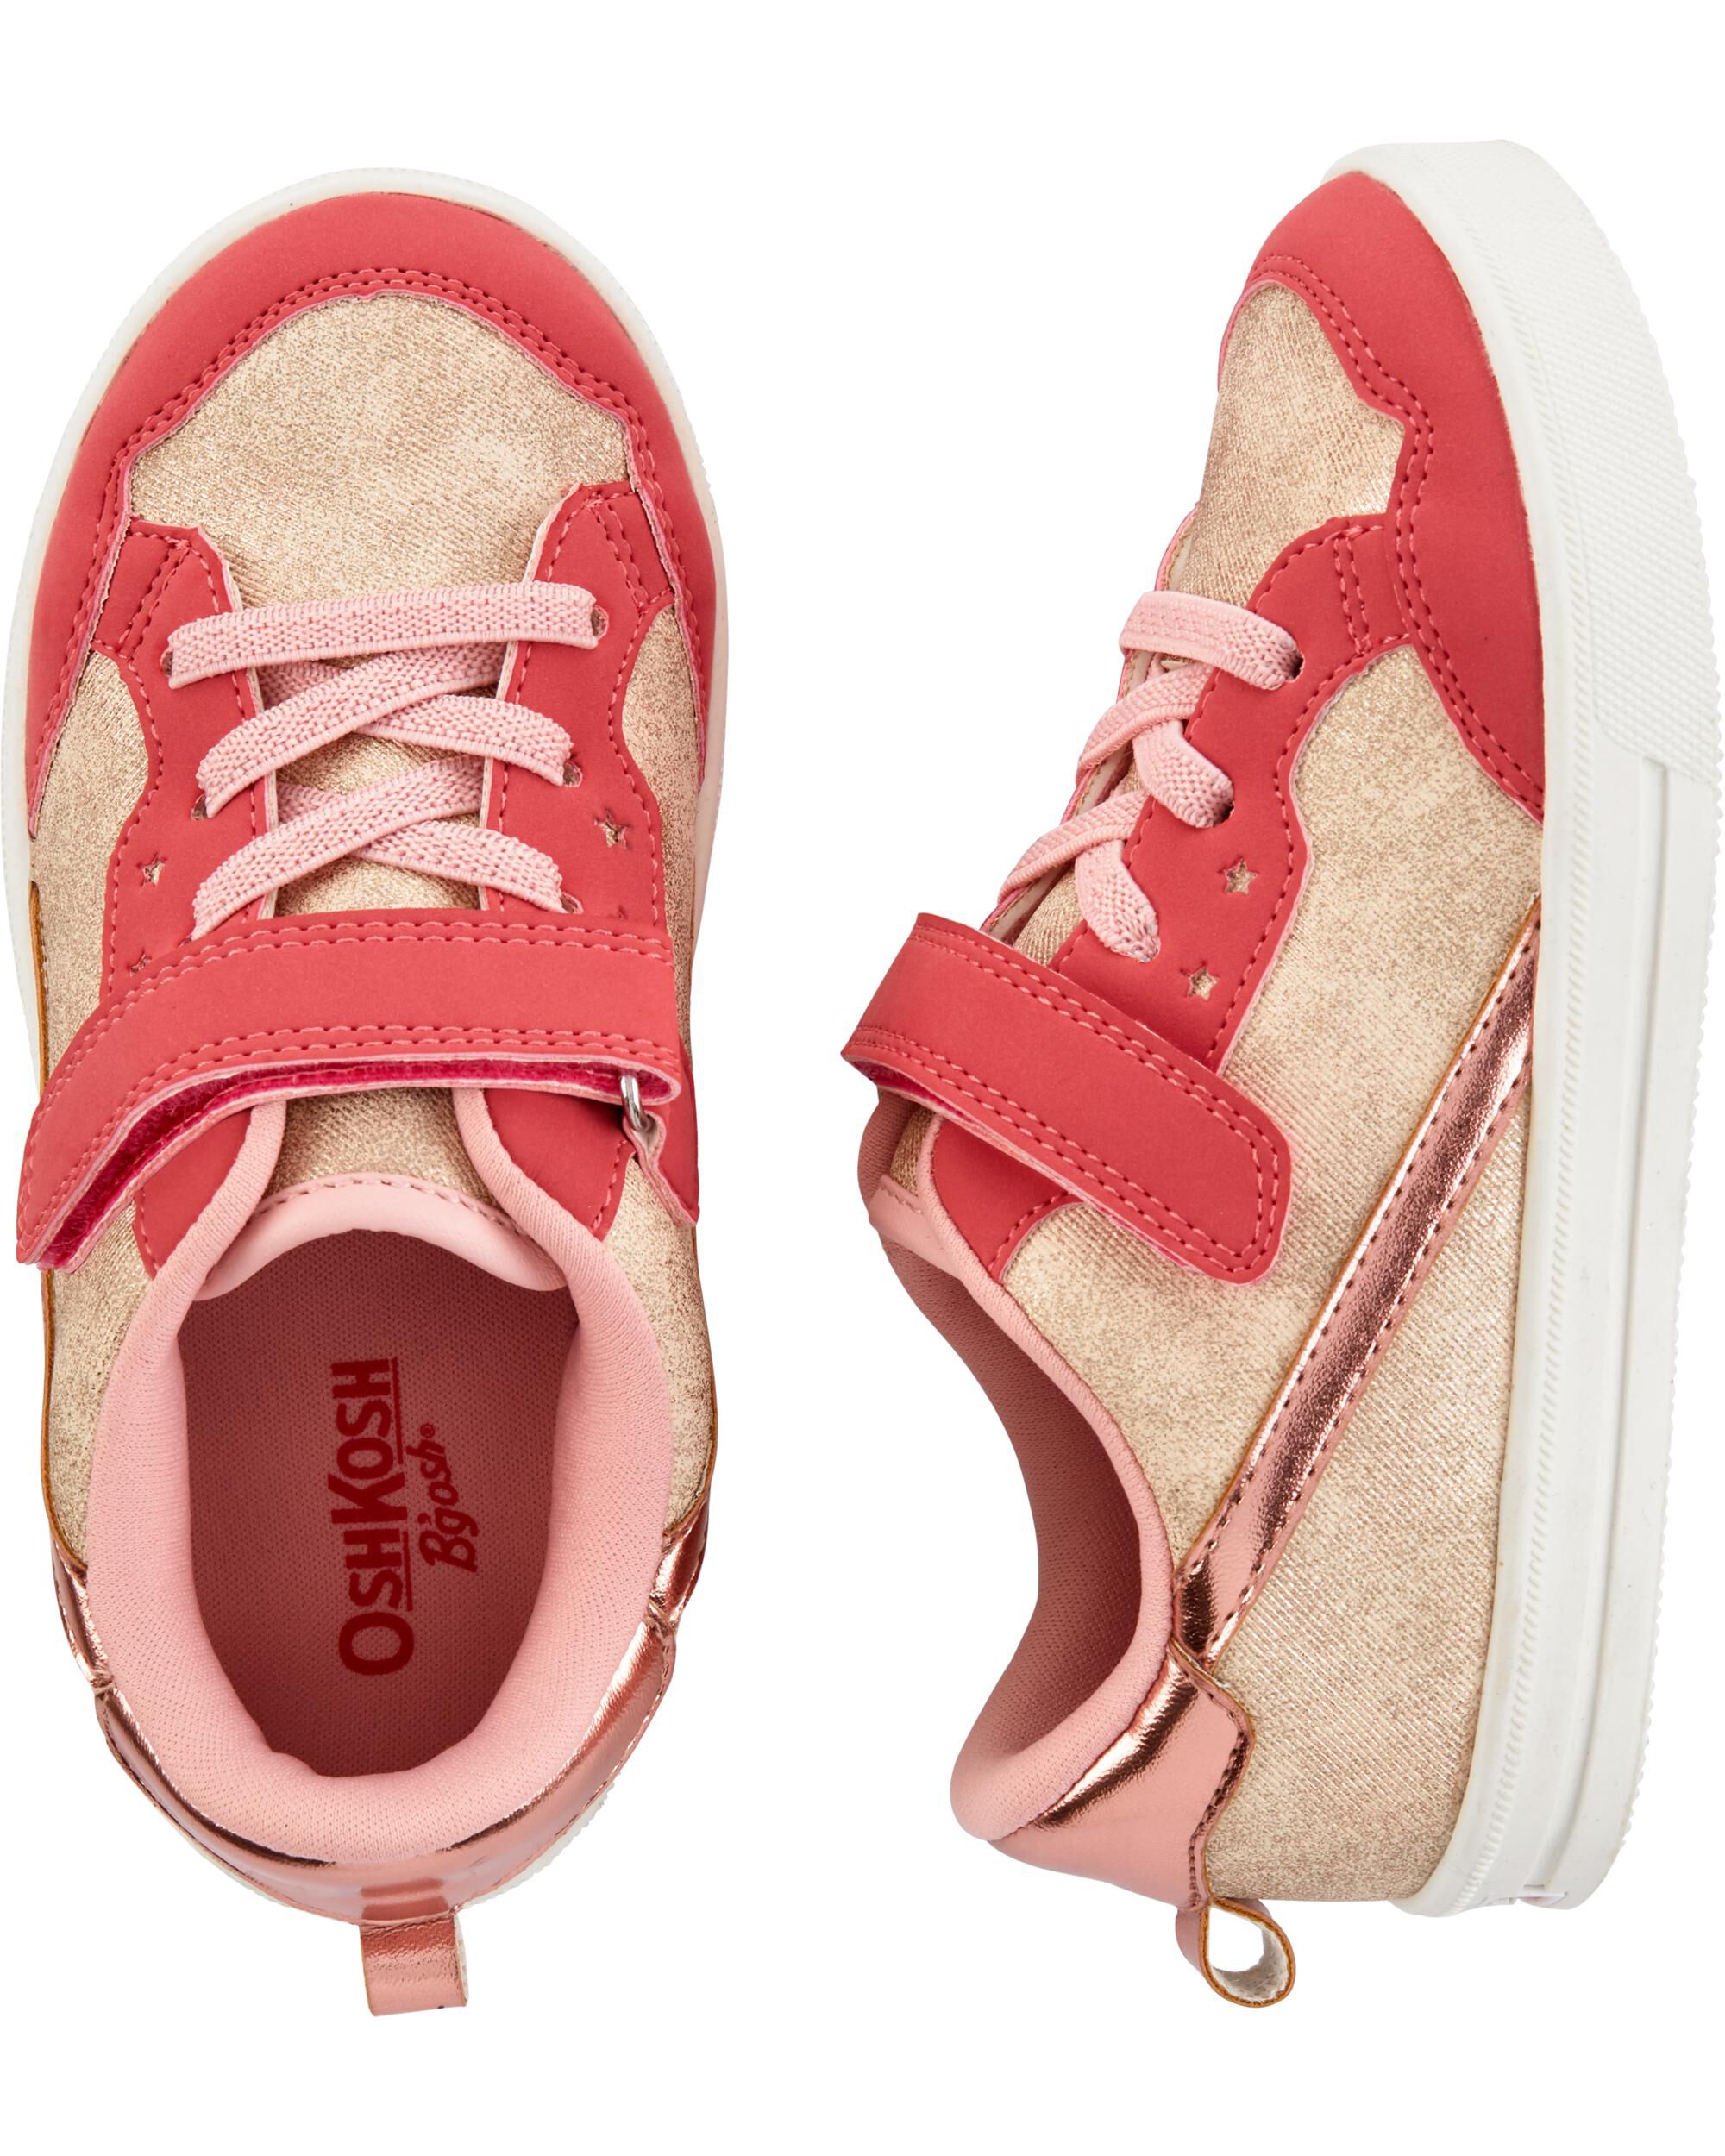 carters rose gold shoes